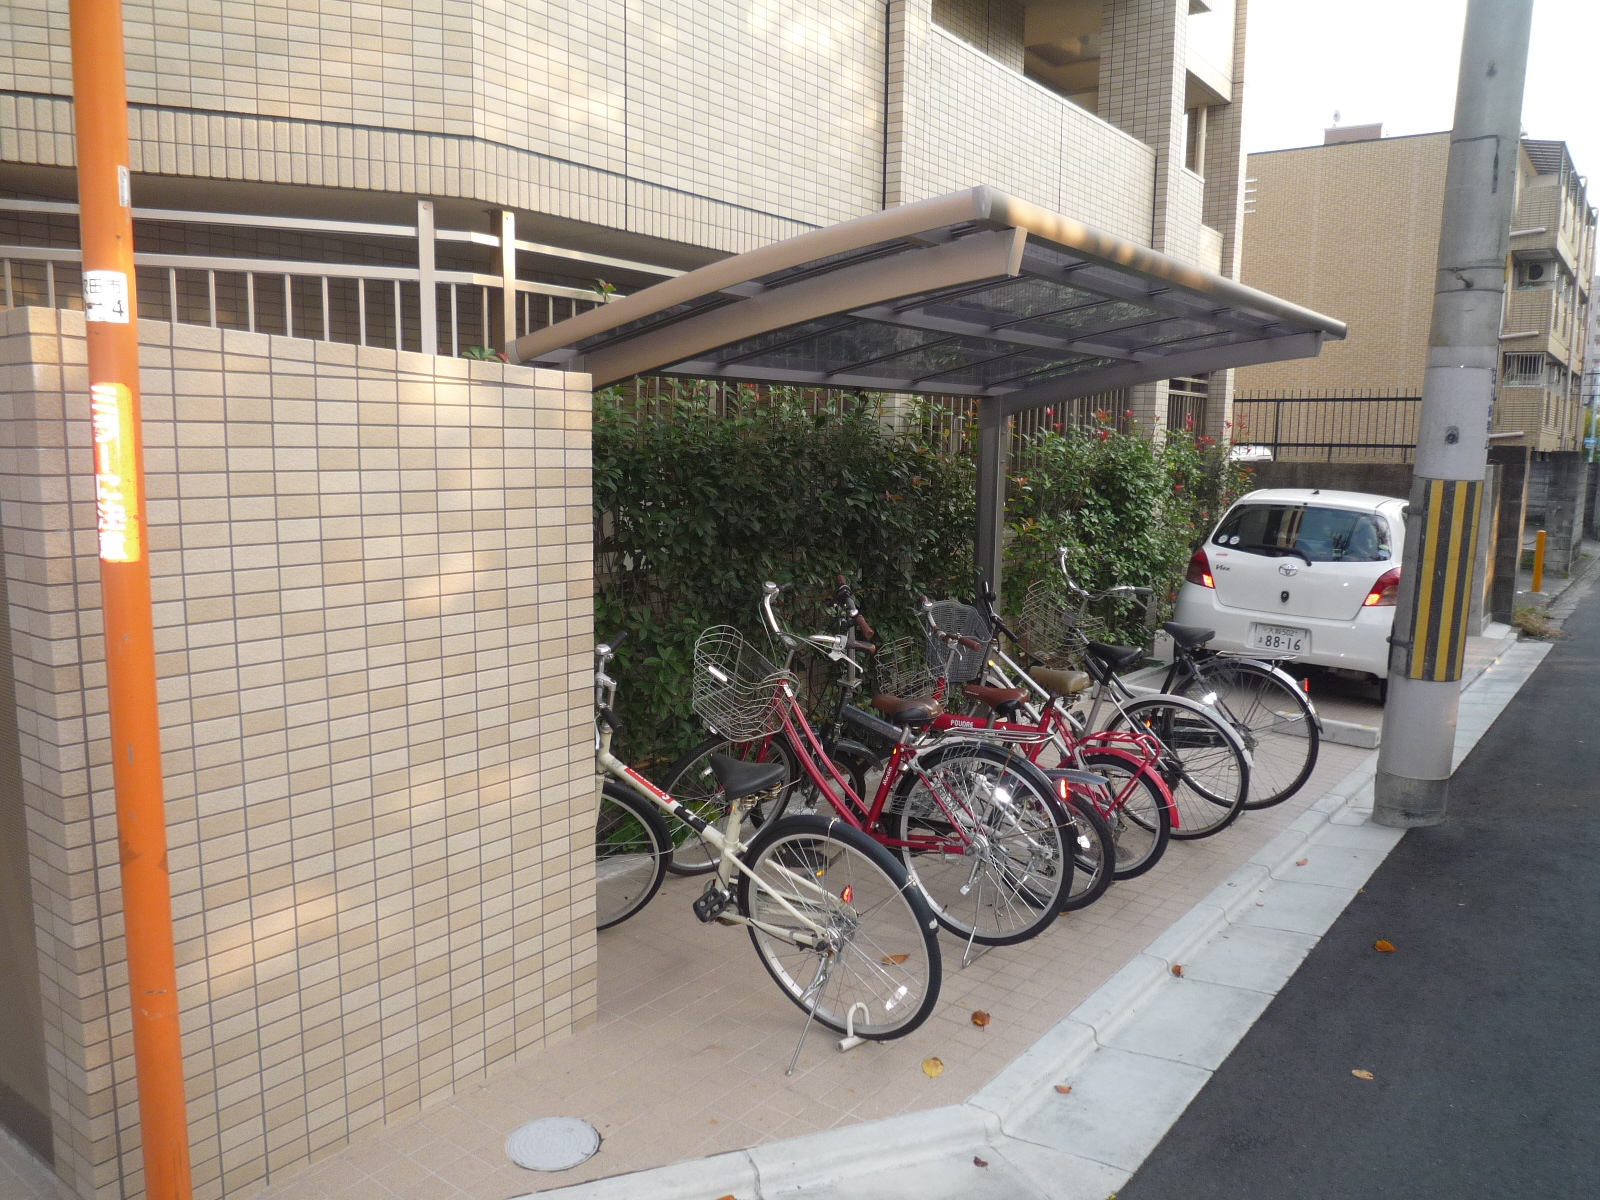 Other common areas. Bicycle storage is also firmly on-site waste storage is enhanced!